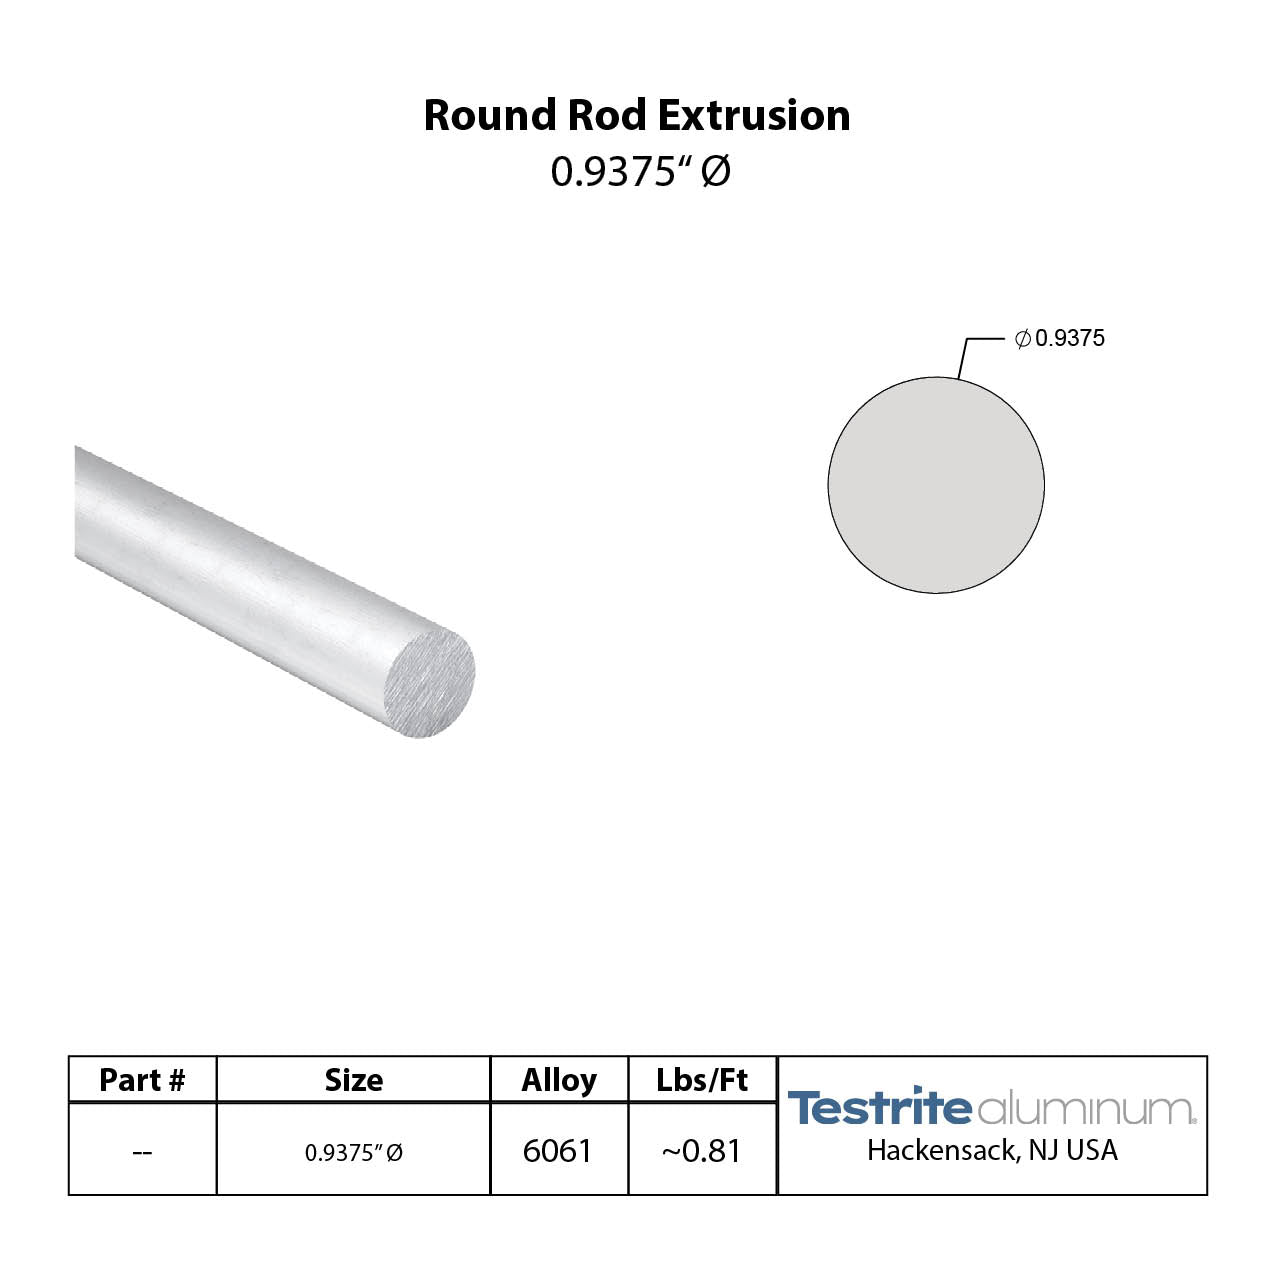 Specification sheet for 15/16" Aluminum Rod, 0.9375" Round Aluminum Rod Aluminum Round Bar Stock .93in Round Aluminum Solid including lbs per ft